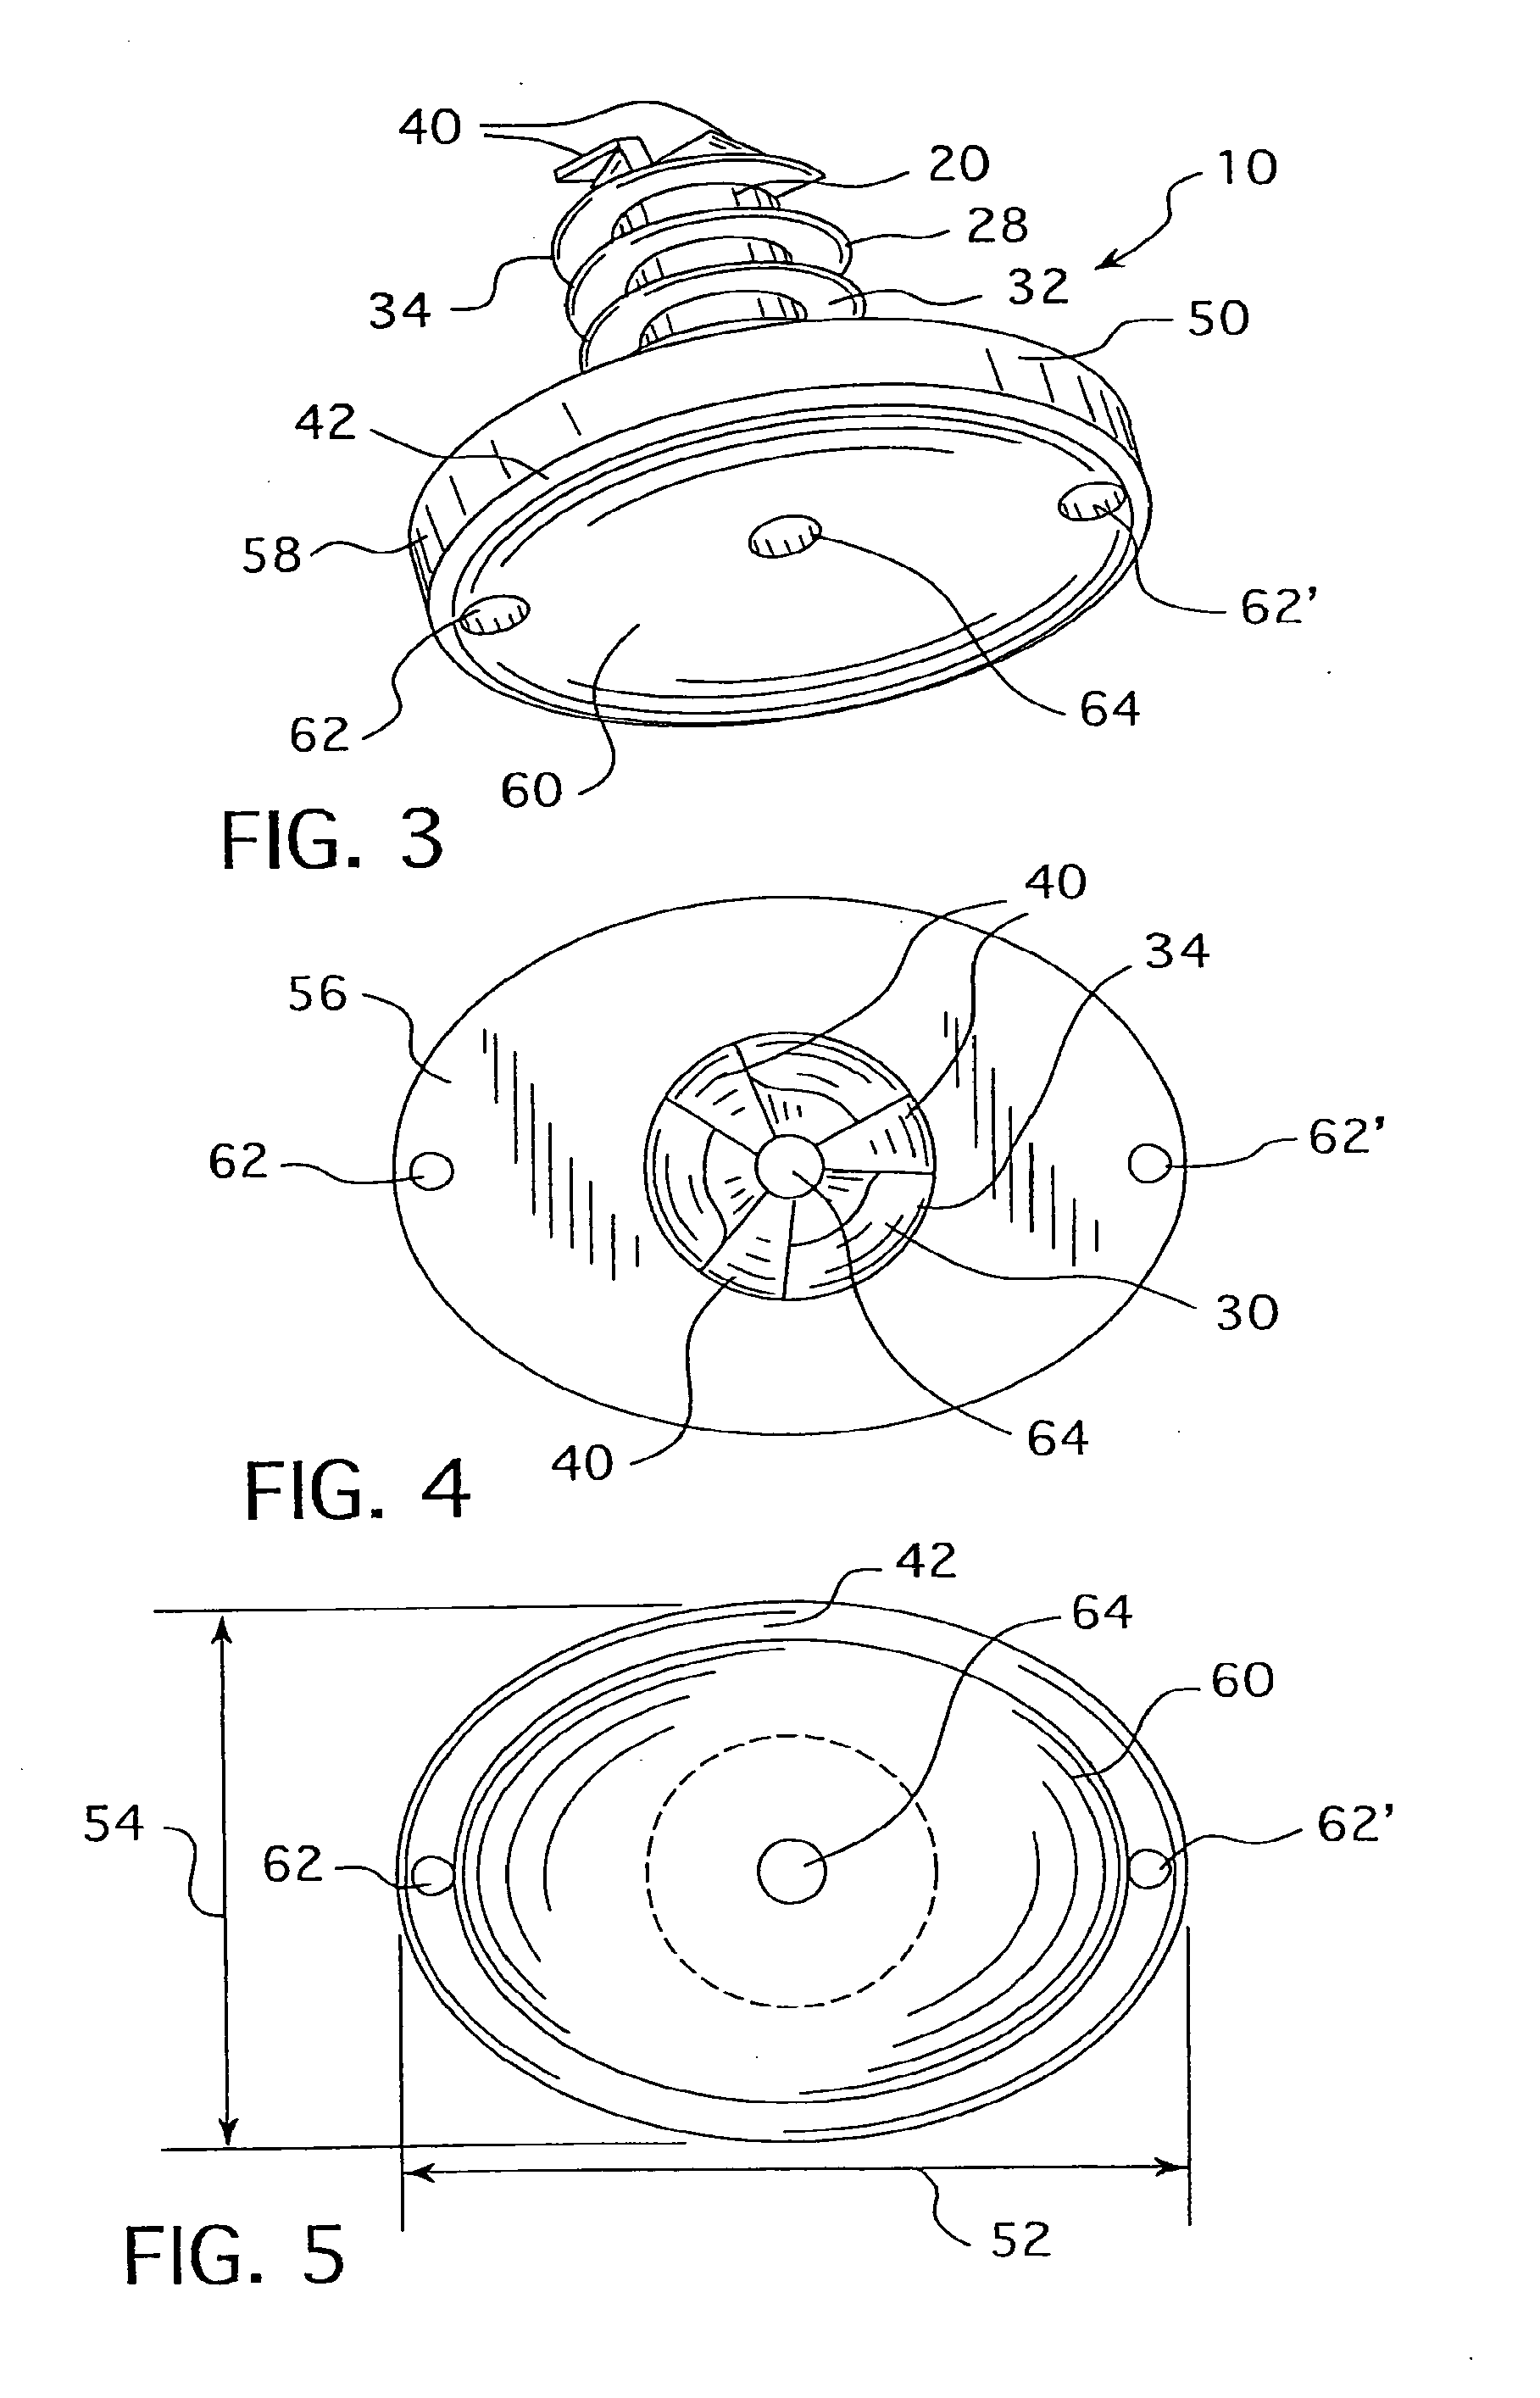 Cannulated Hemi-Implant and Methods of Use Thereof